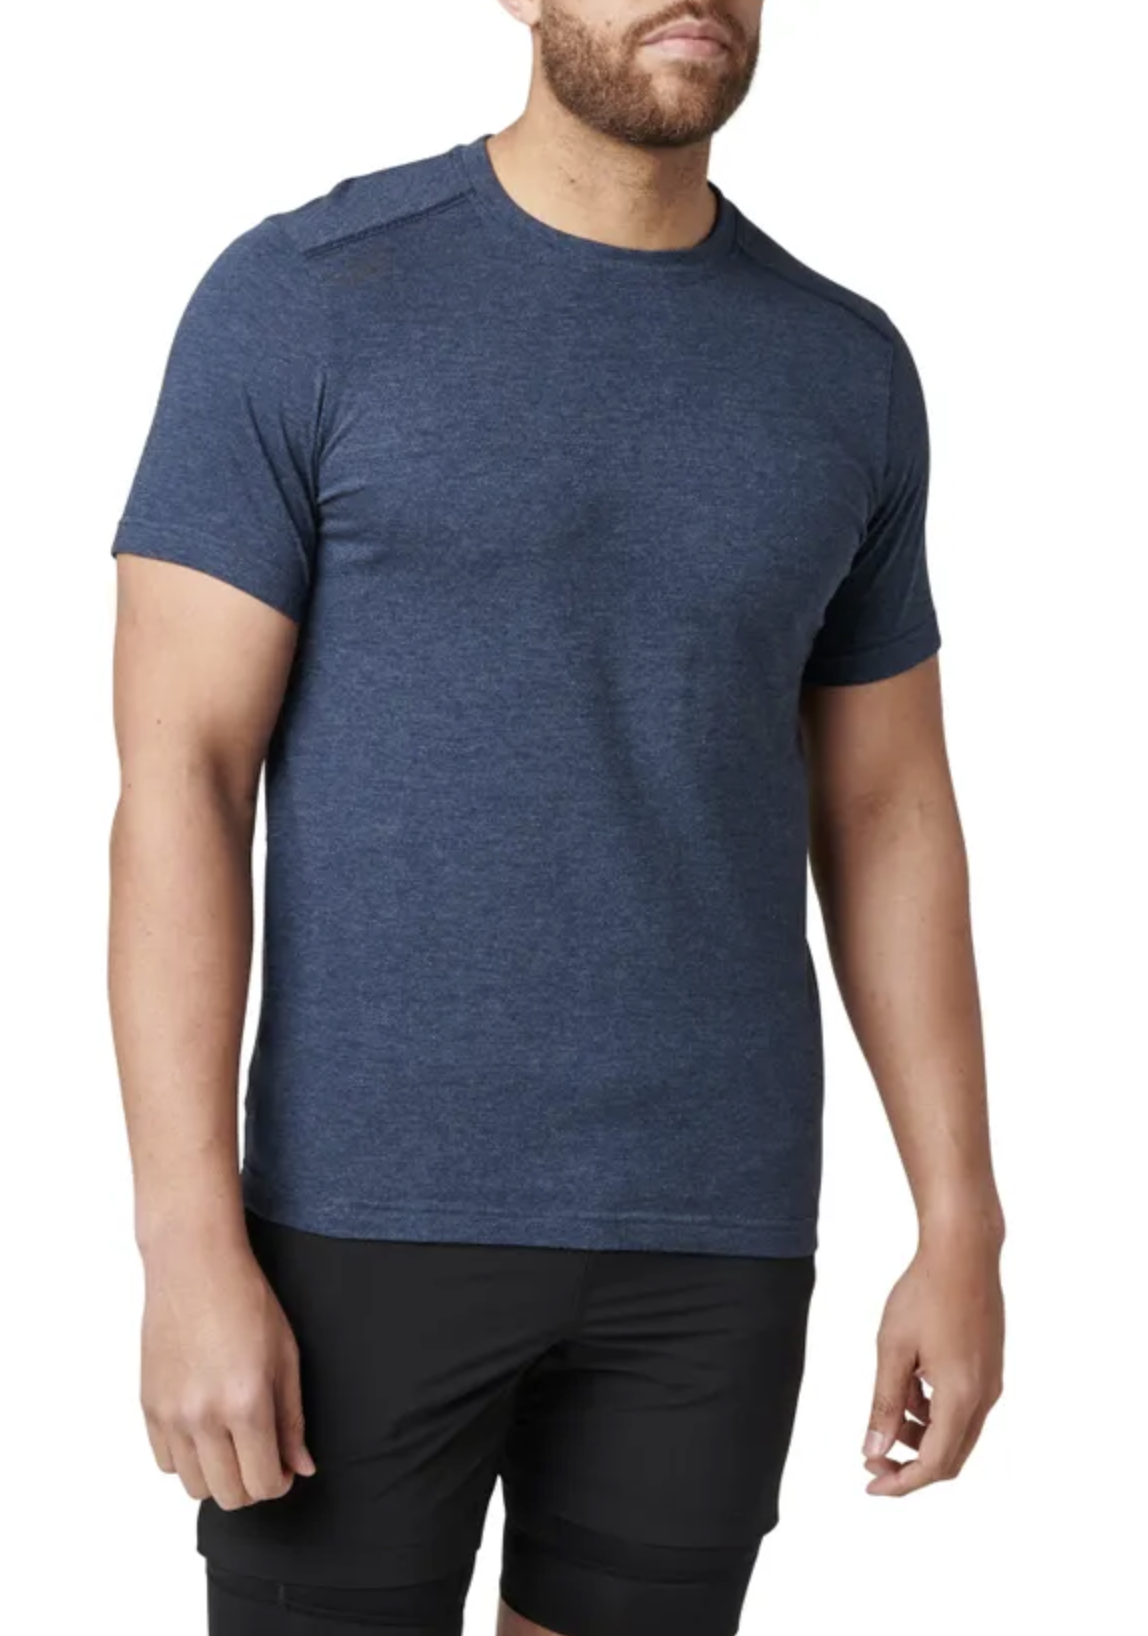 5.11 - PT-R Charge Short Sleeve Top 2.0 - Pacific Navy Heather (1052)